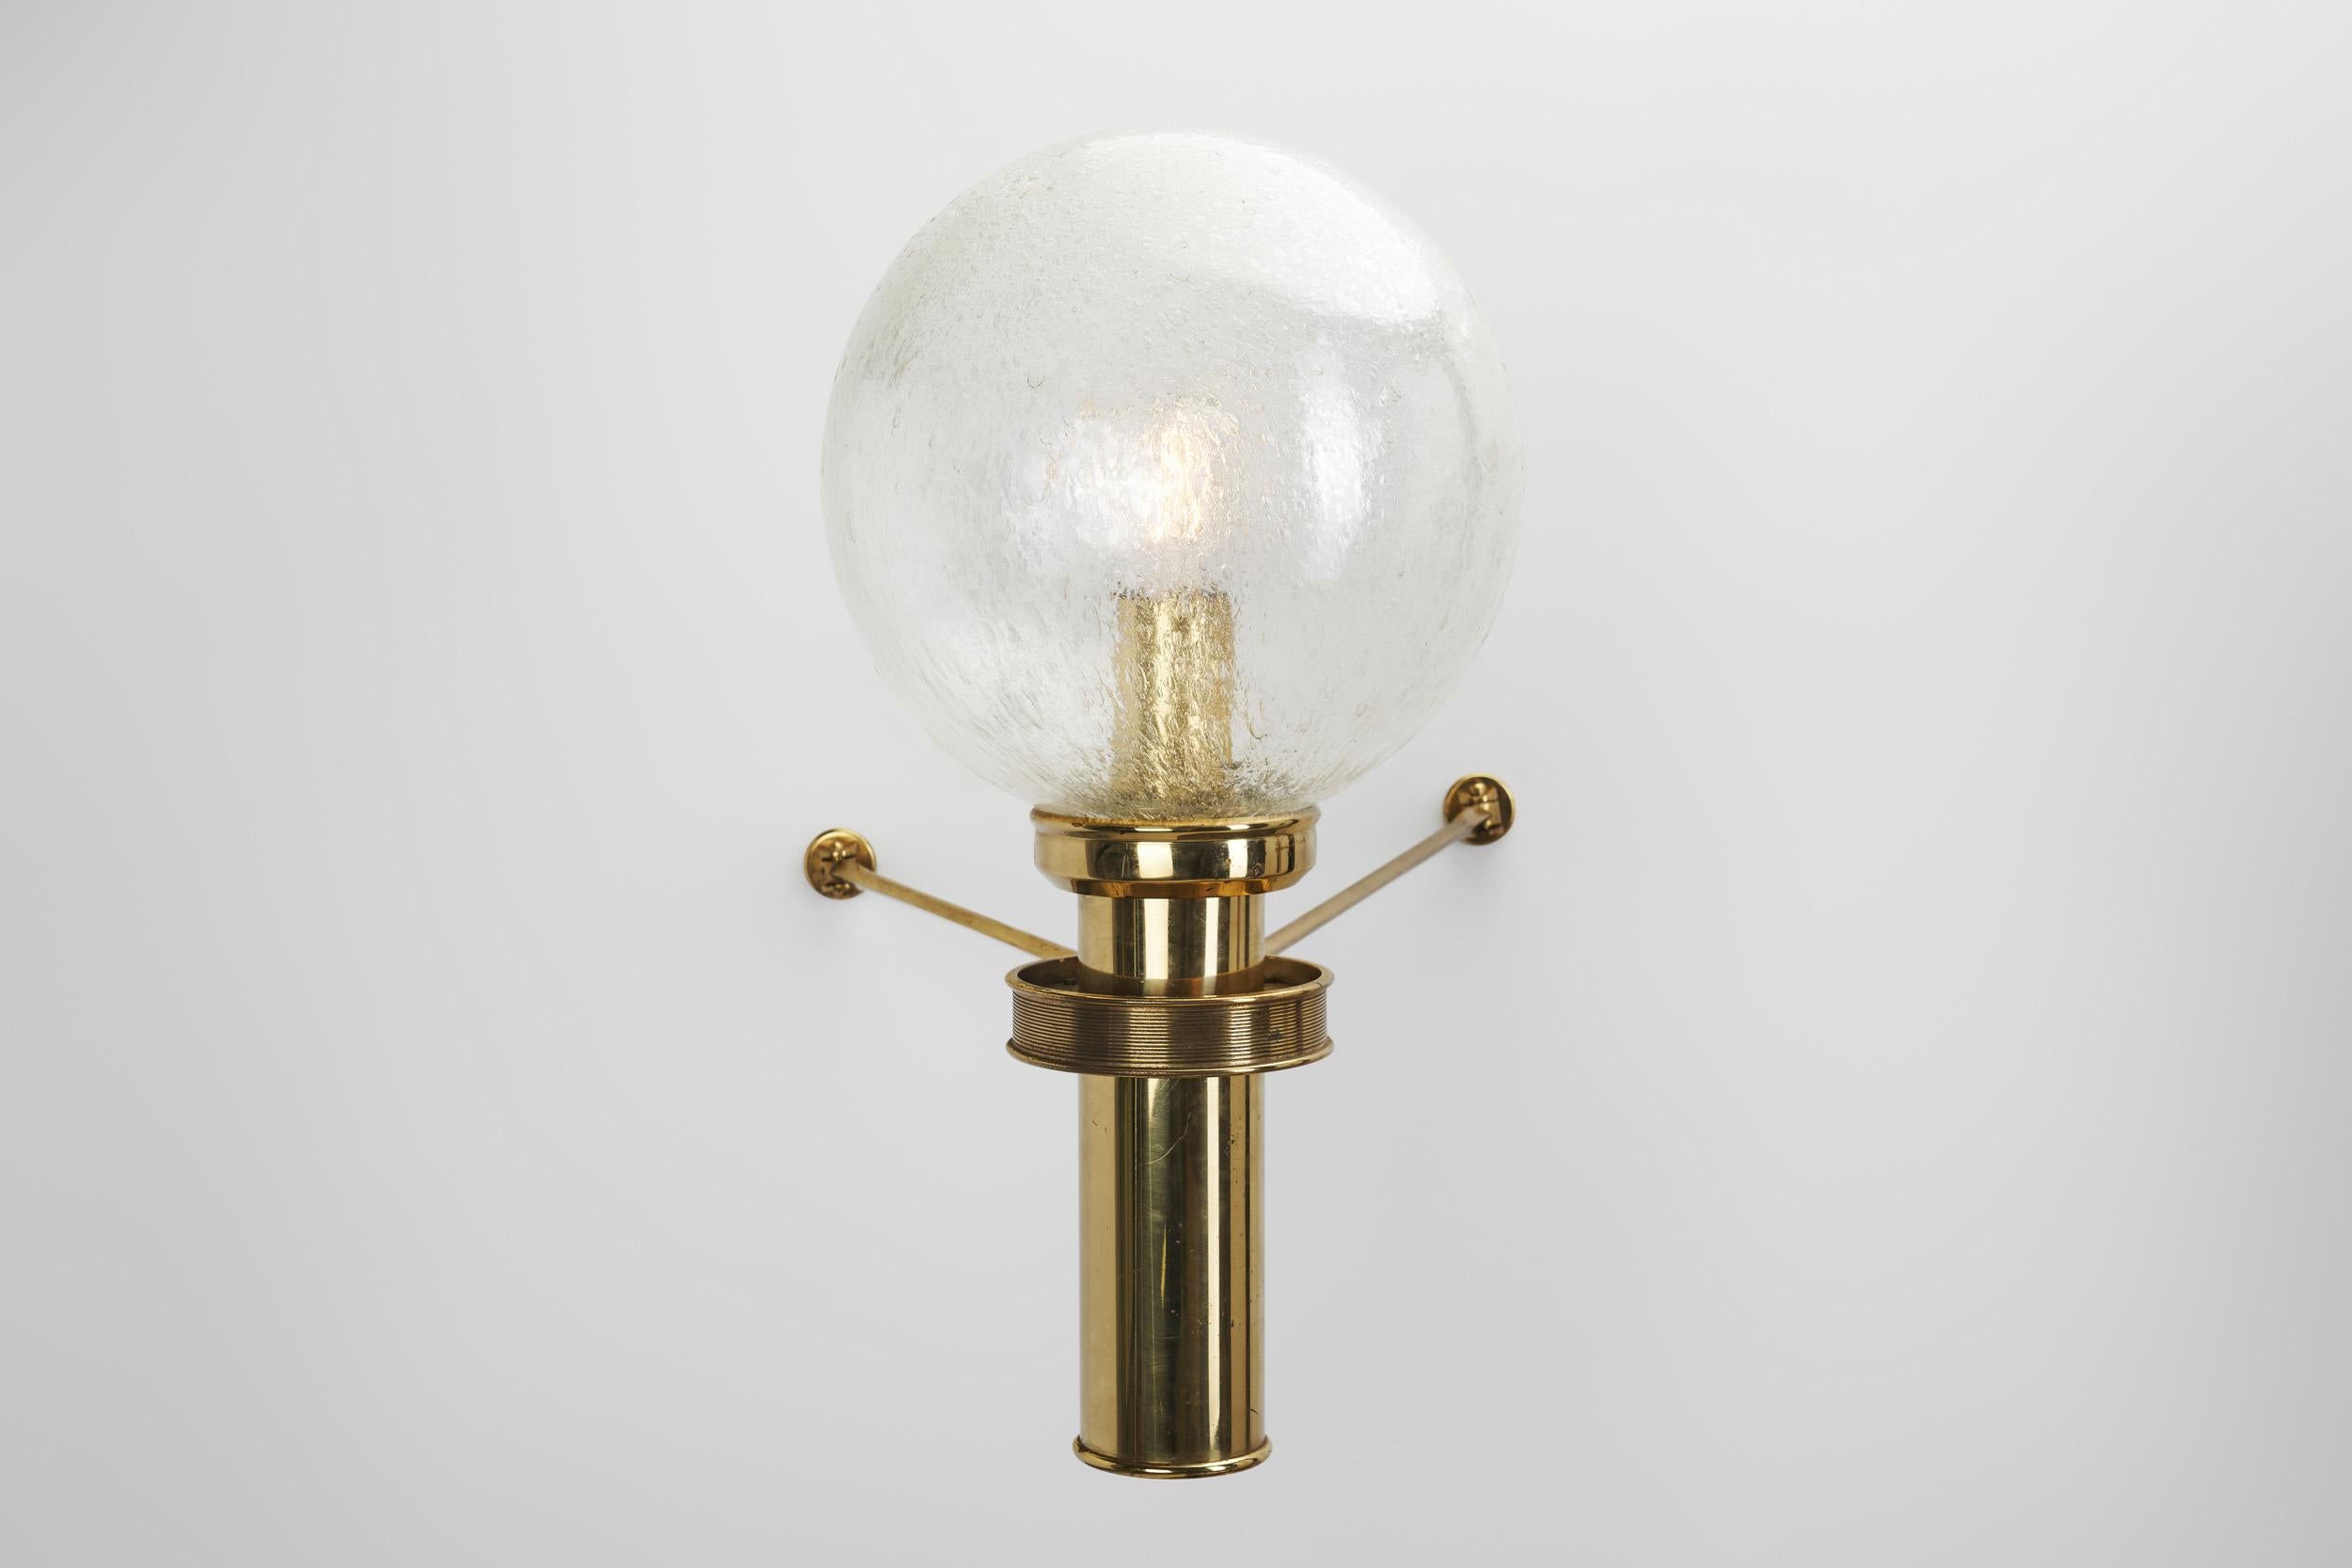 Large European Modern Wall Sconce in Brass & Bubble Glass, Europe circa 1950s For Sale 1